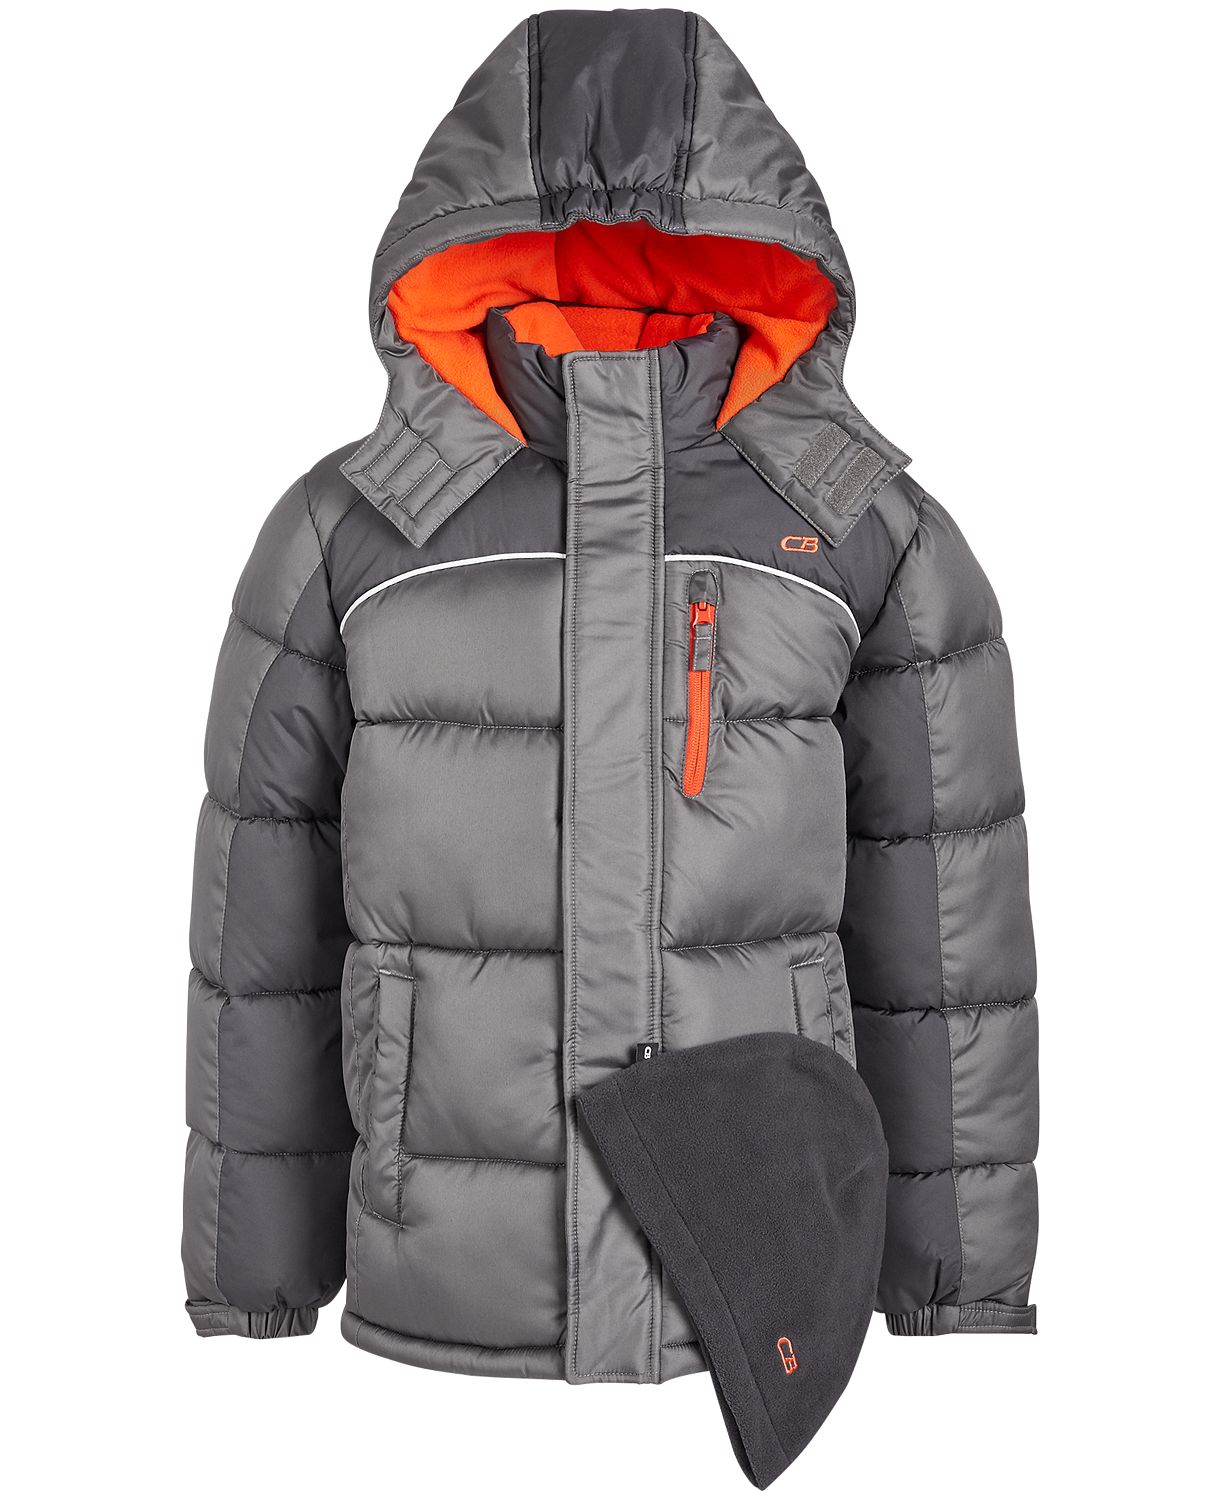 FLASH SALE: 50-70% OFF Select coats & cold-weather accessories for the family